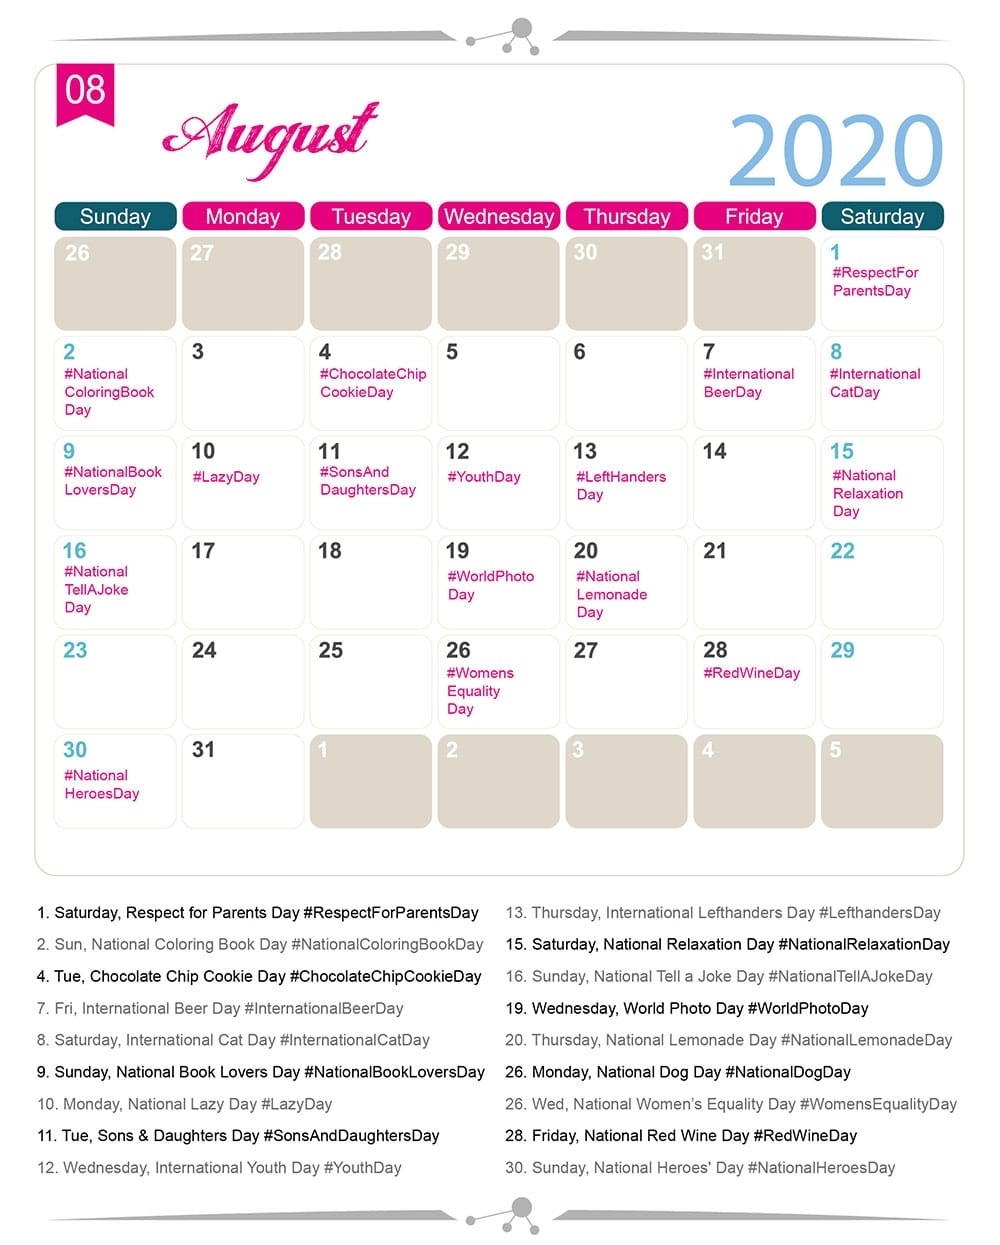 The 2020 Social Media Holiday Calendar - Make A Website Hub inside Please Find A Calendar On Line For Special Days Of The Year 2020